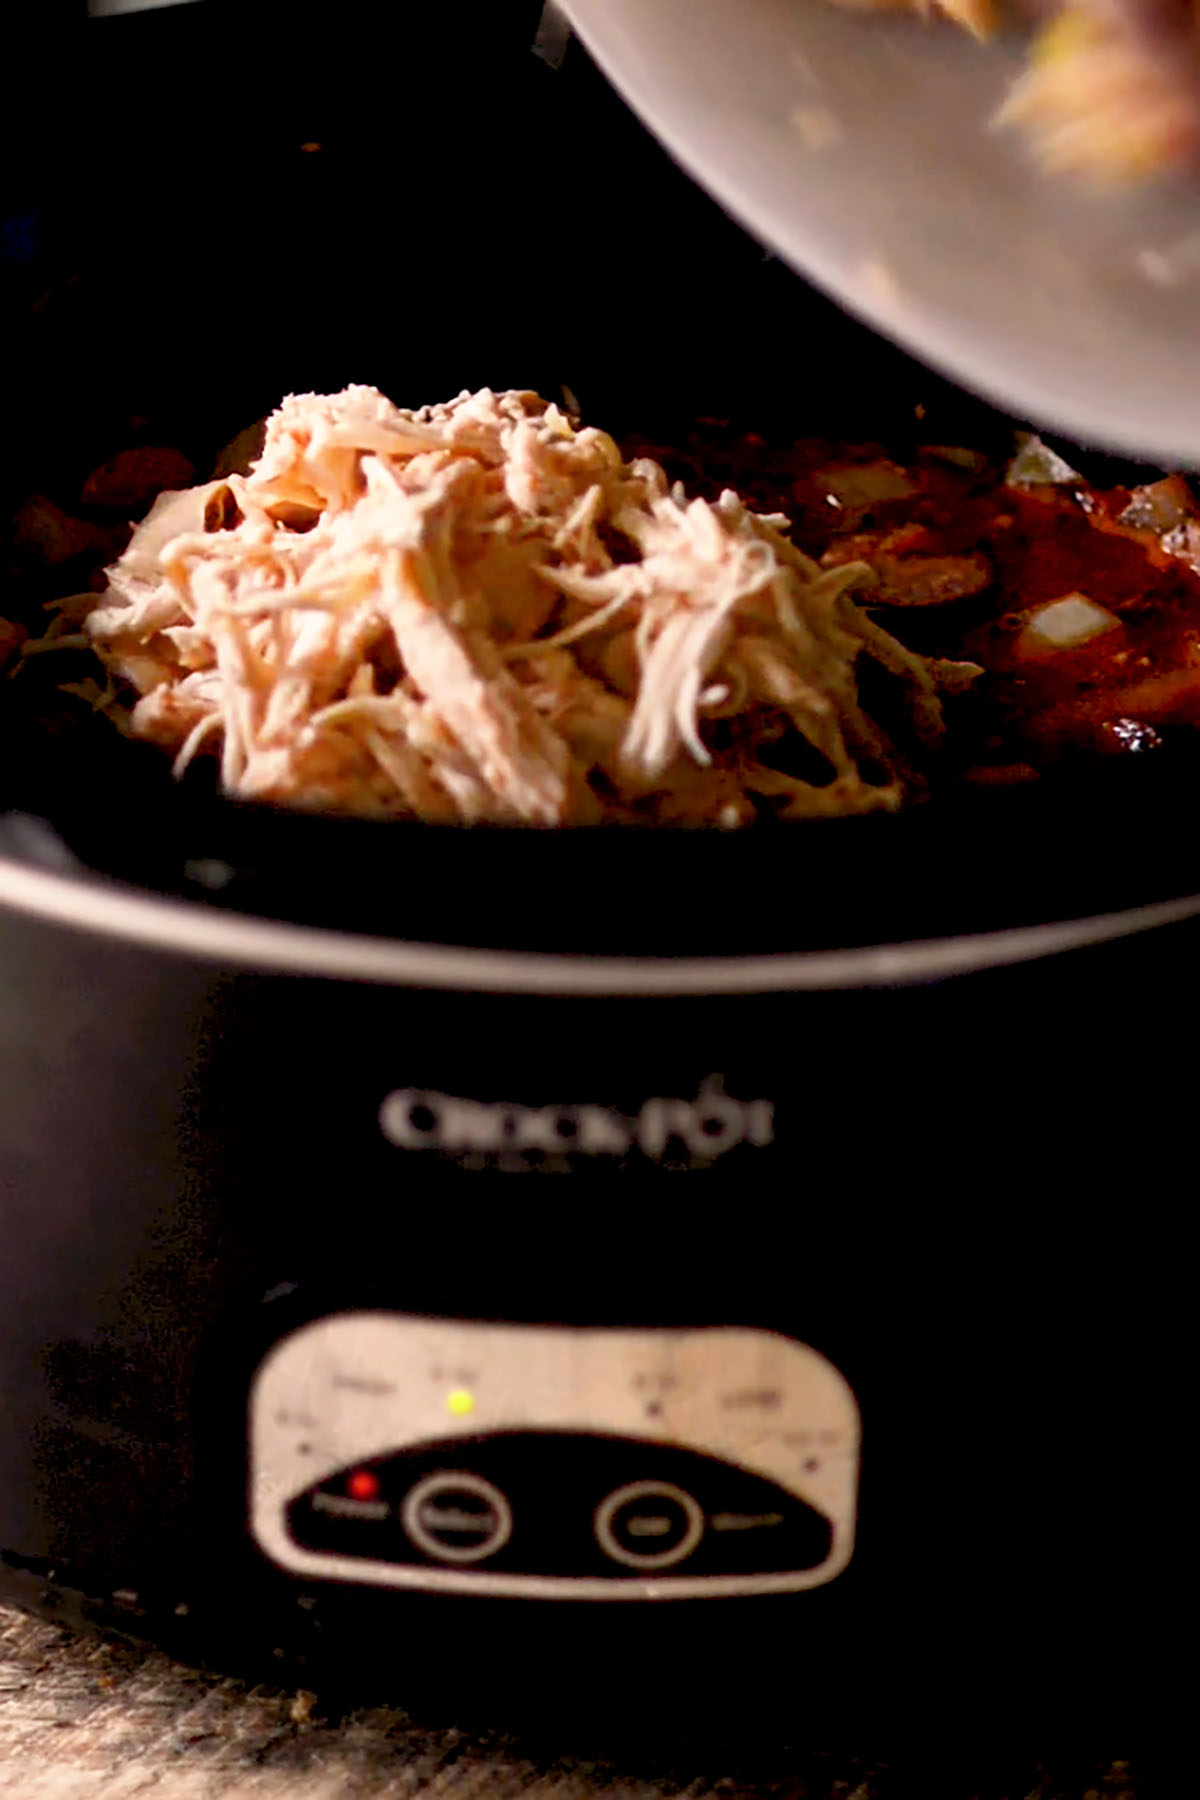 Shredded chicken being added to a Crock Pot.